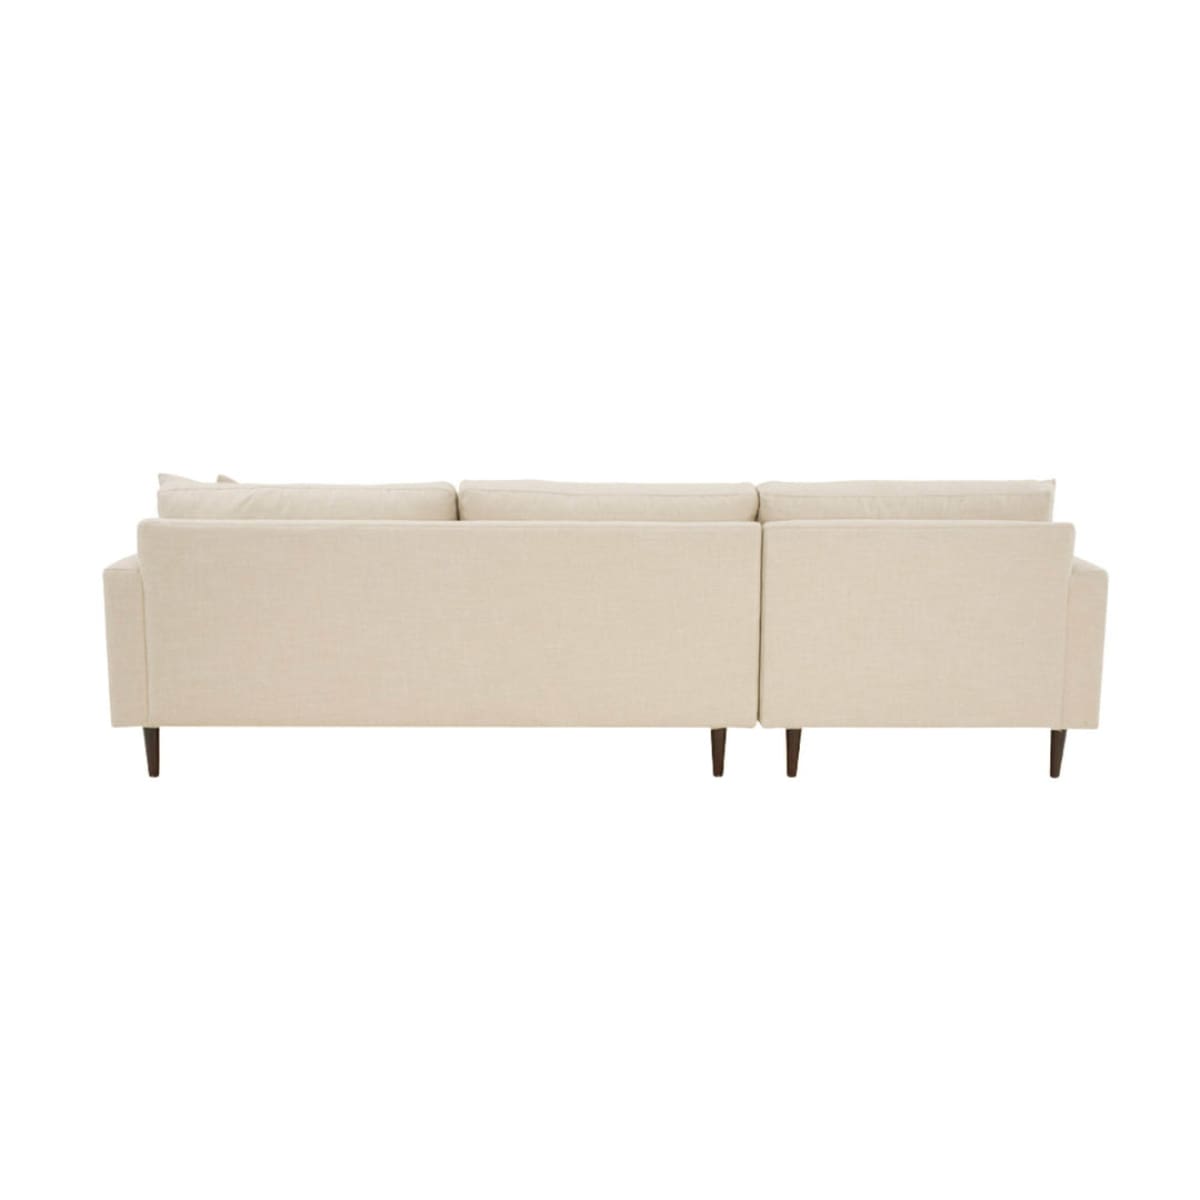 Martha Left Sectional Sofa - Beach Alabaster - lh-import-sectionals